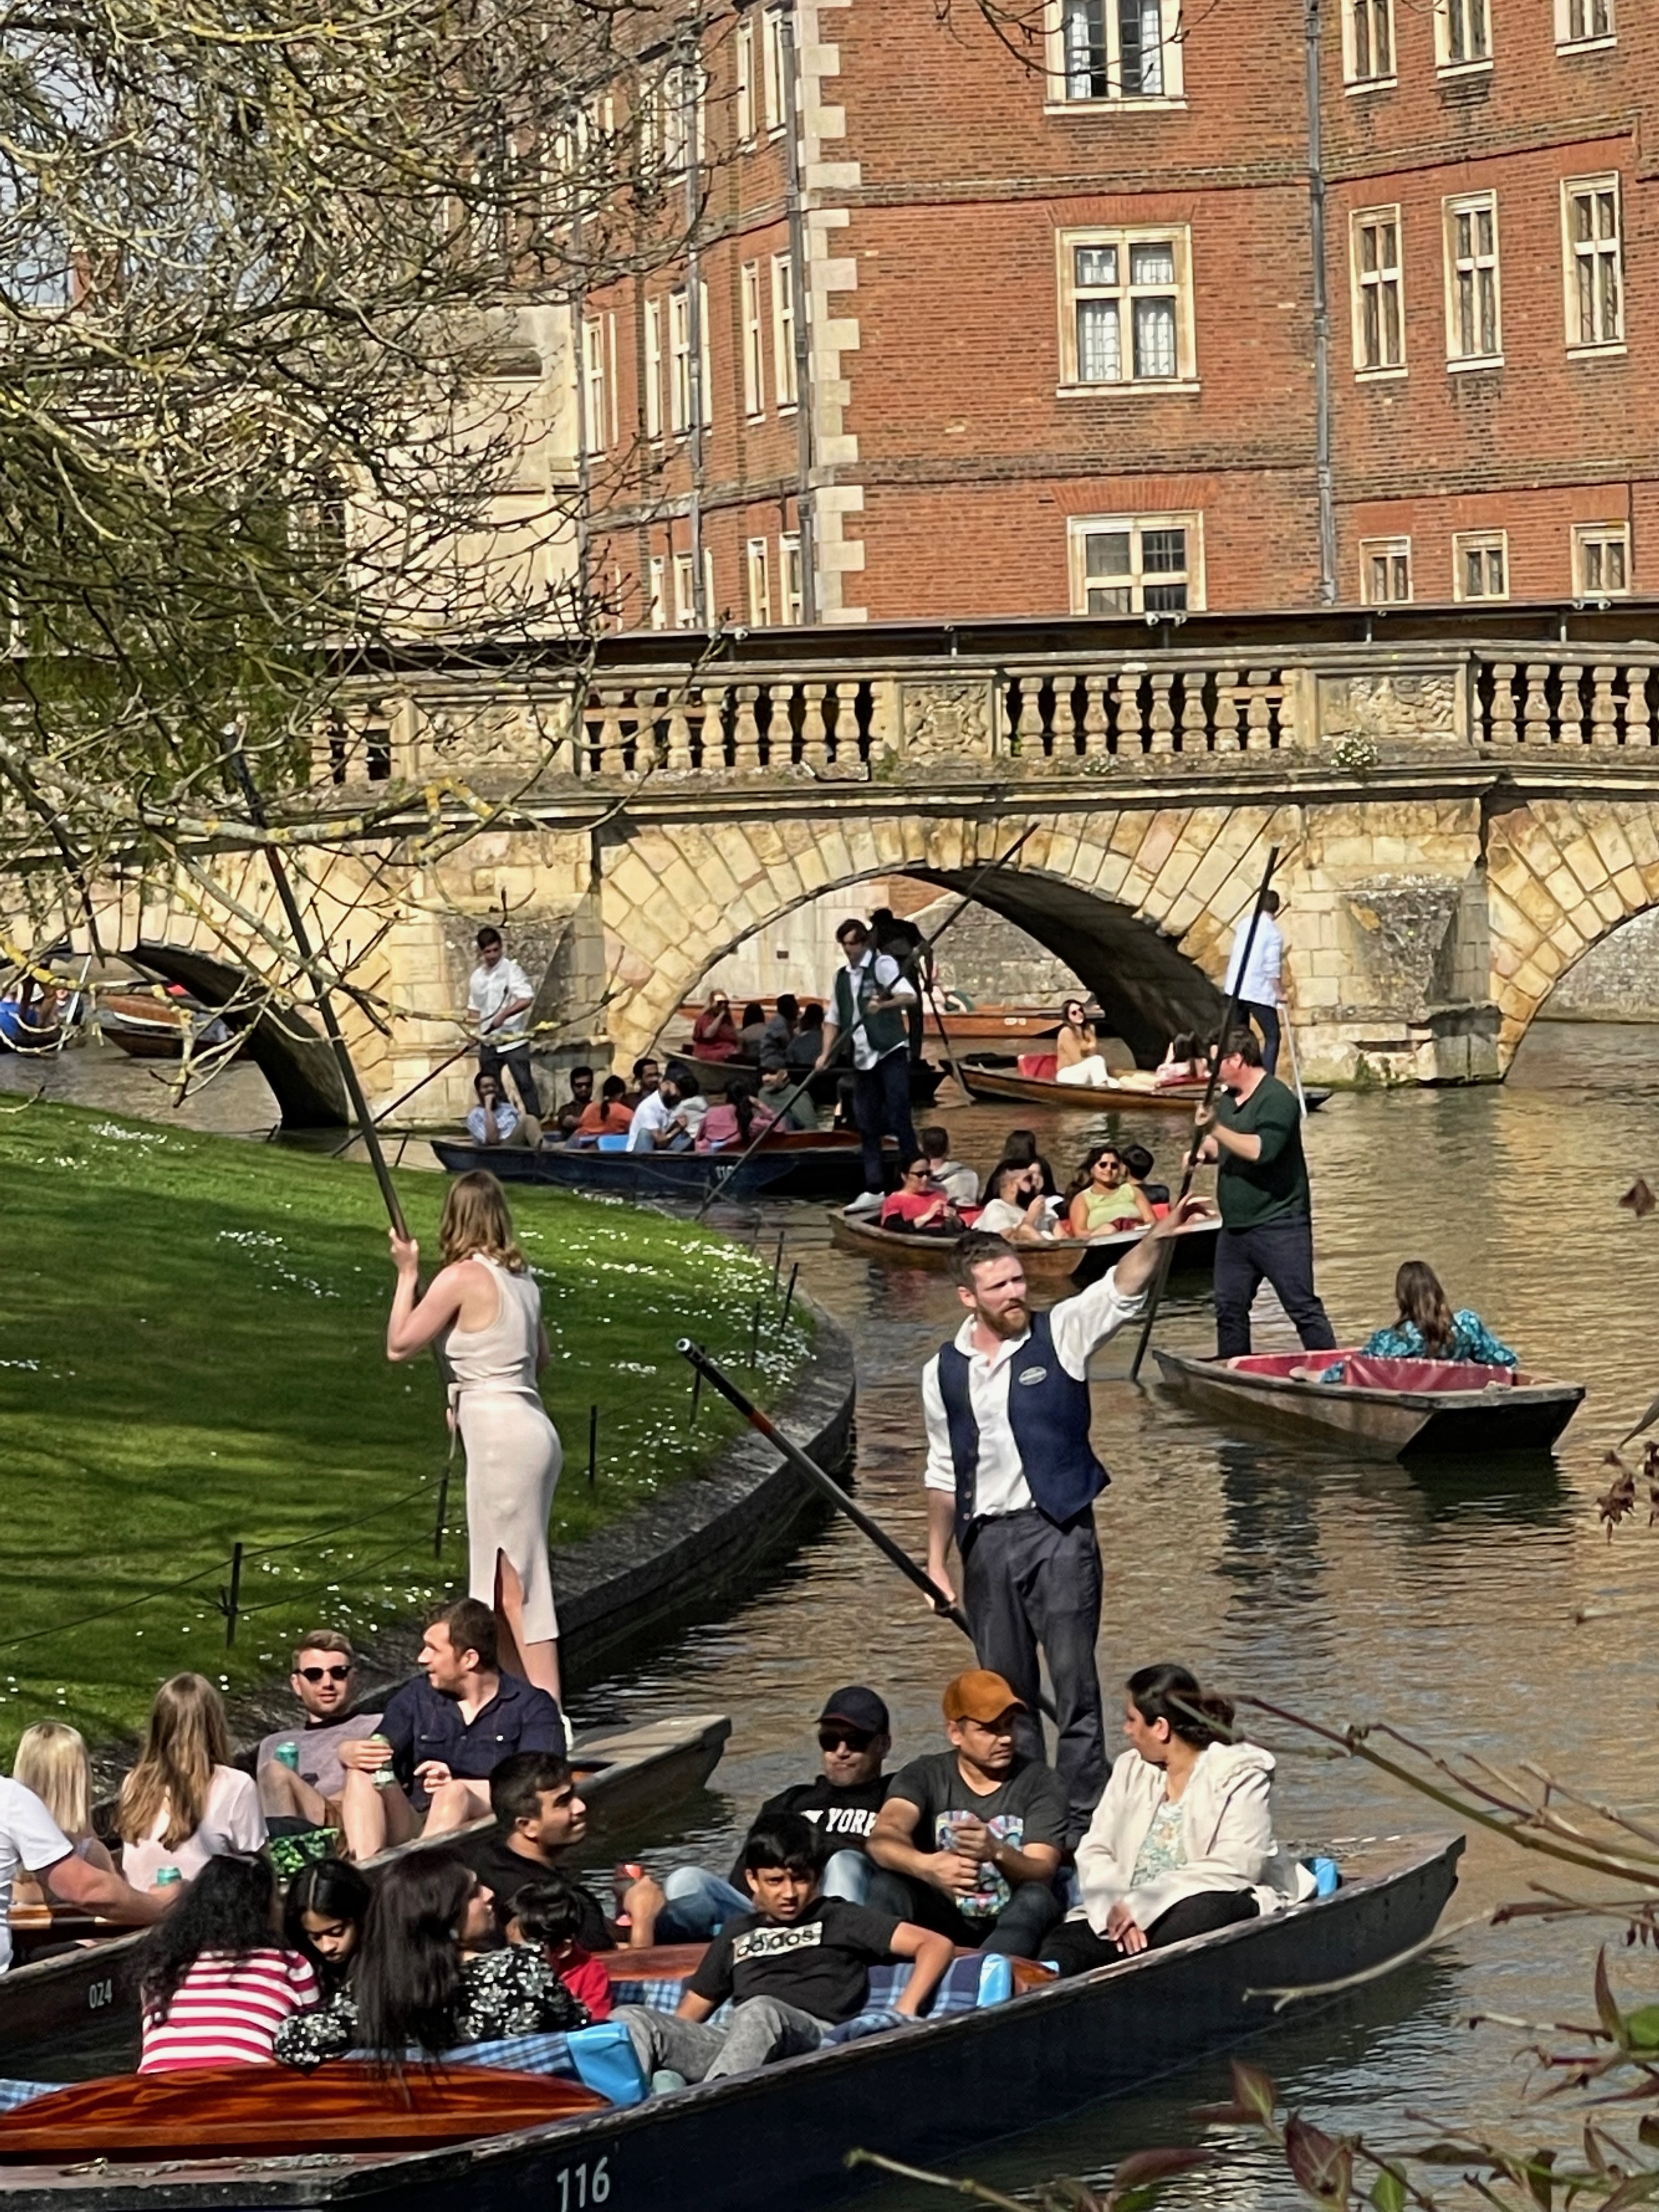 A day out in Cambridge: What to see and do